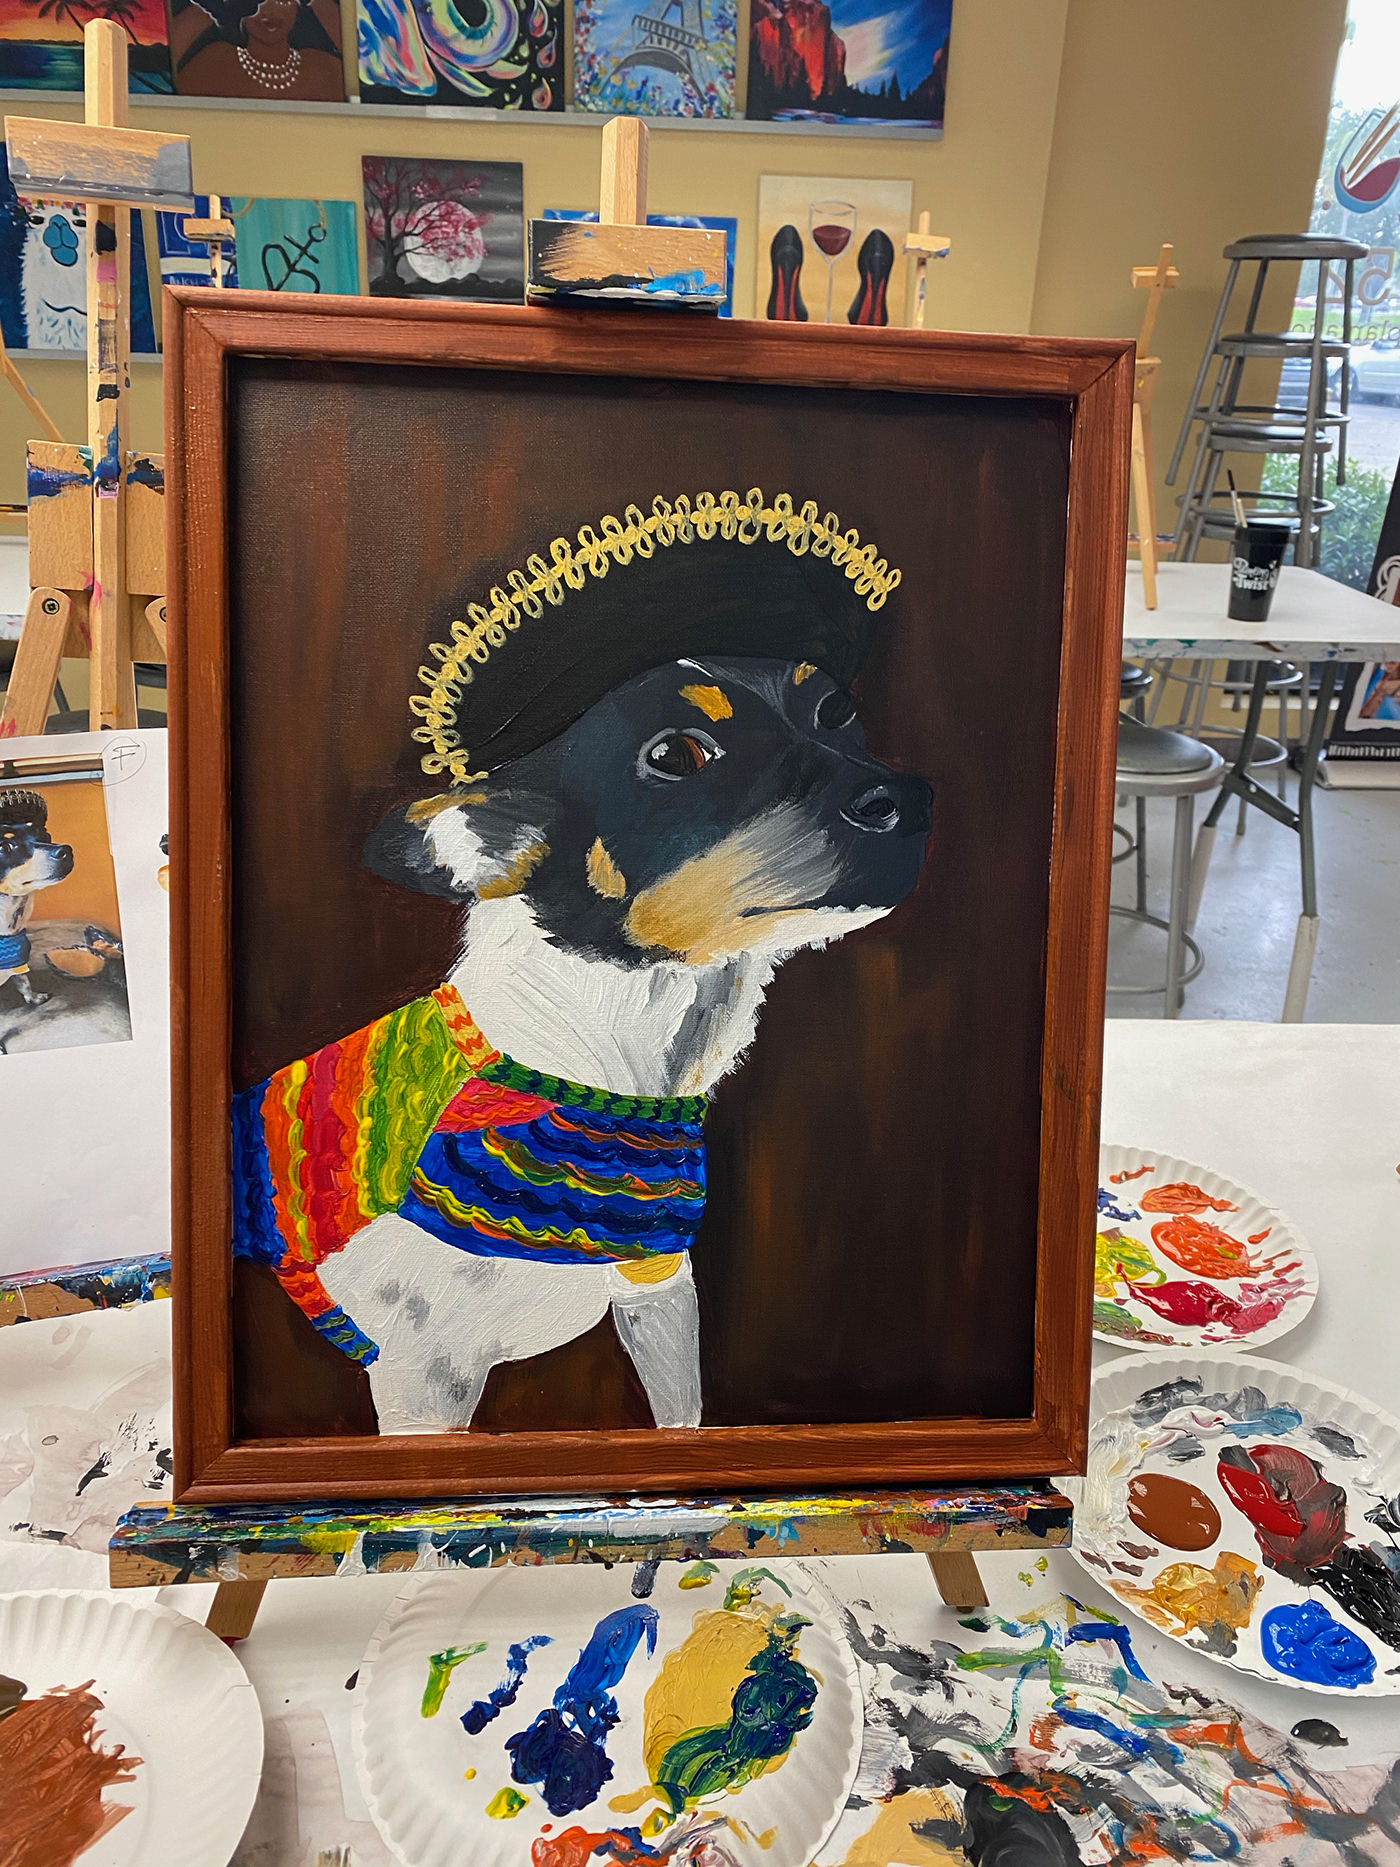 Melissa Klunder's painting of her dog